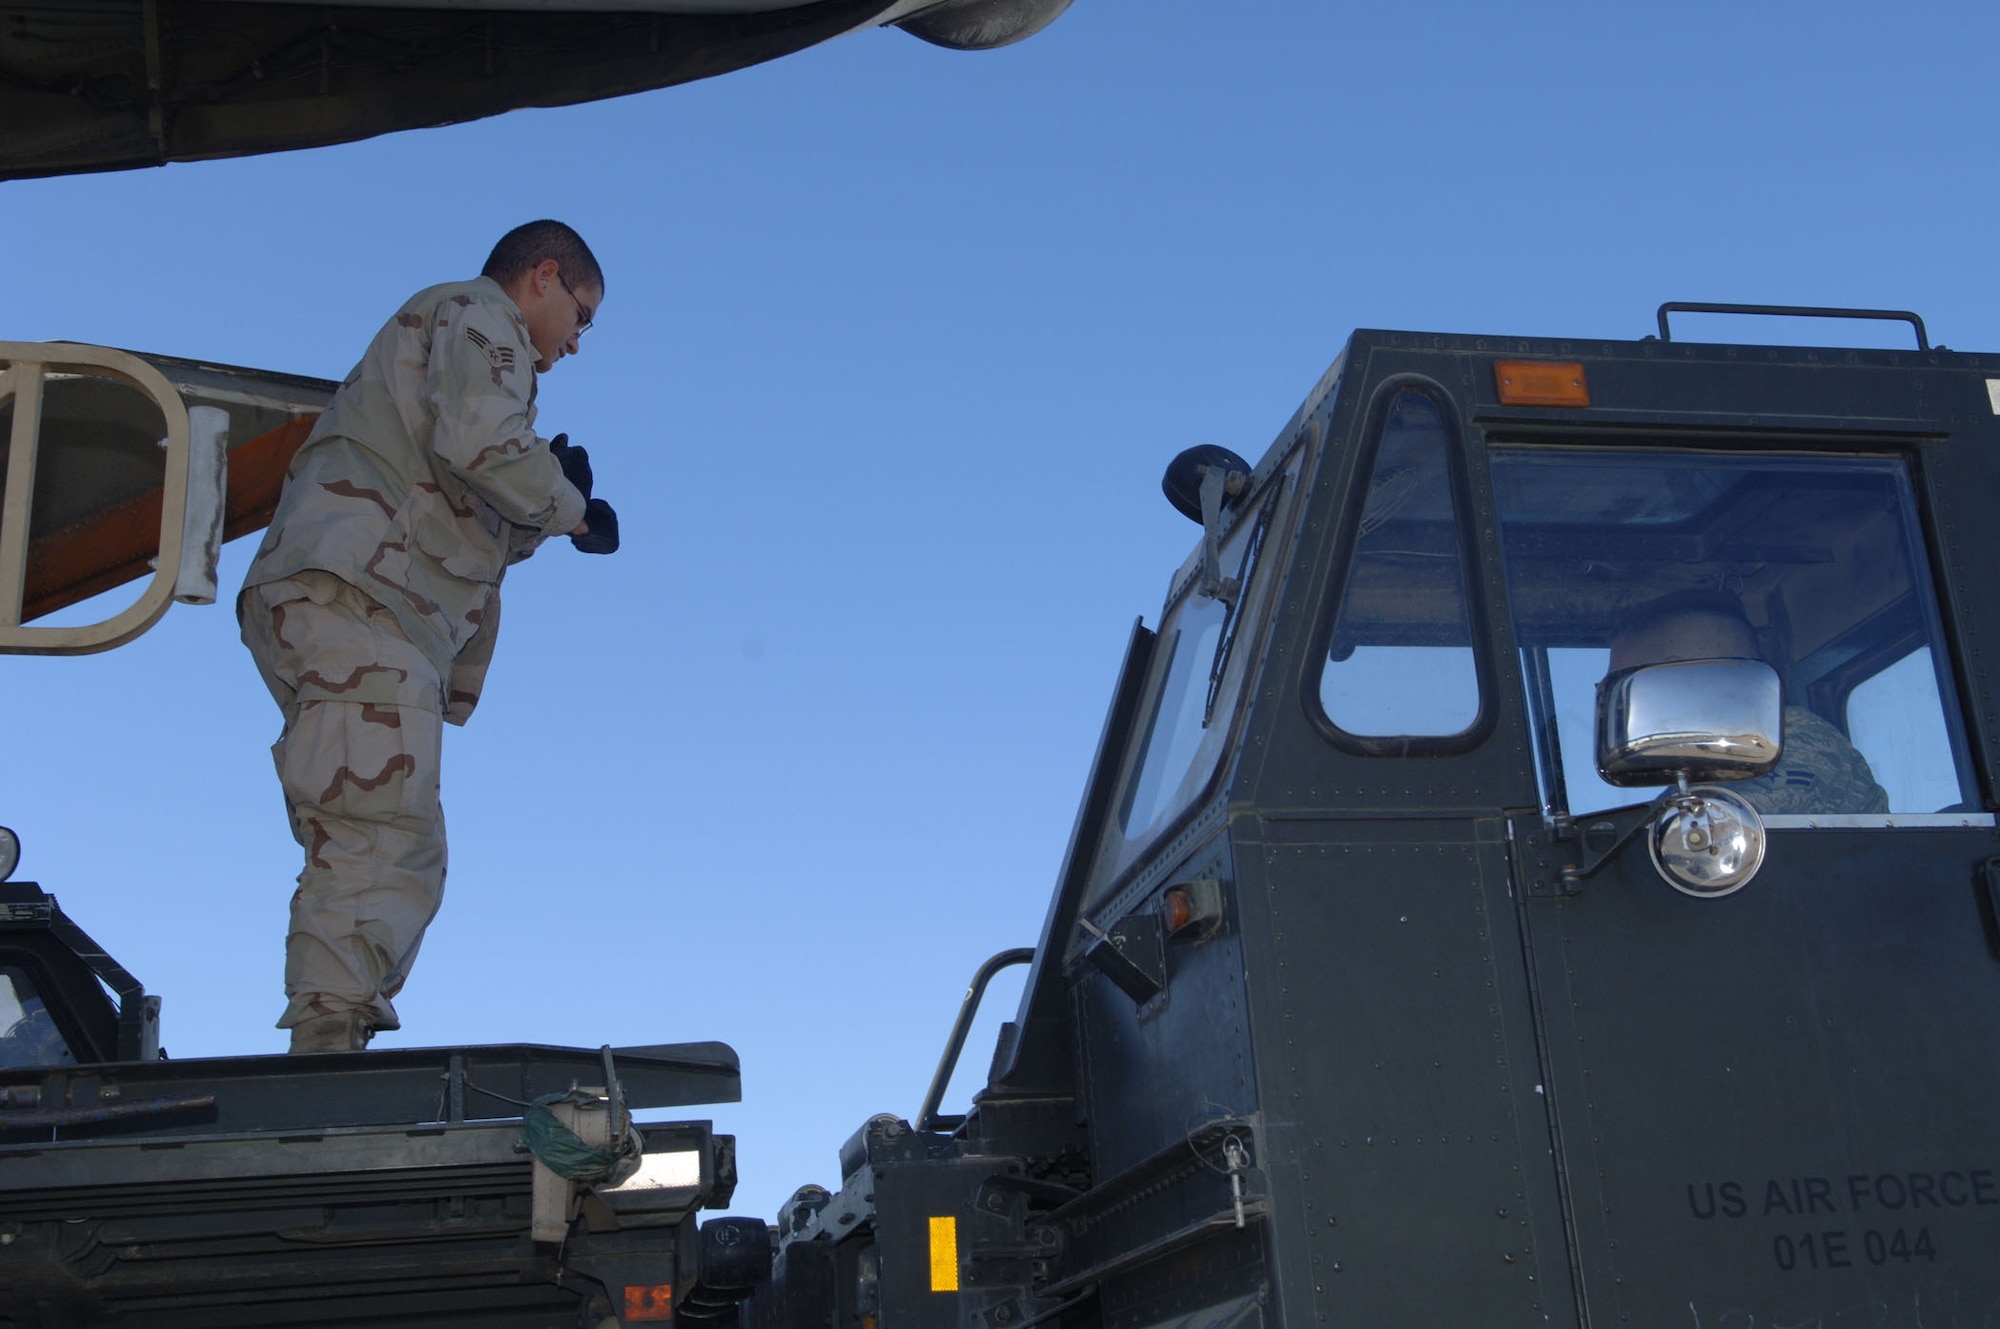 BALAD AIR BASE, Iraq – Senior Airman Andres Silvera, a 332nd Expeditionary Logistics Readiness Squadron Aerial Port Flight transportation specialist, guides a k-loader into place to offload cargo. Airman Silvera is deployed from Pope Air Force Base, N.C. (U.S. Air Force photo/Senior Airman Terri Barriere)